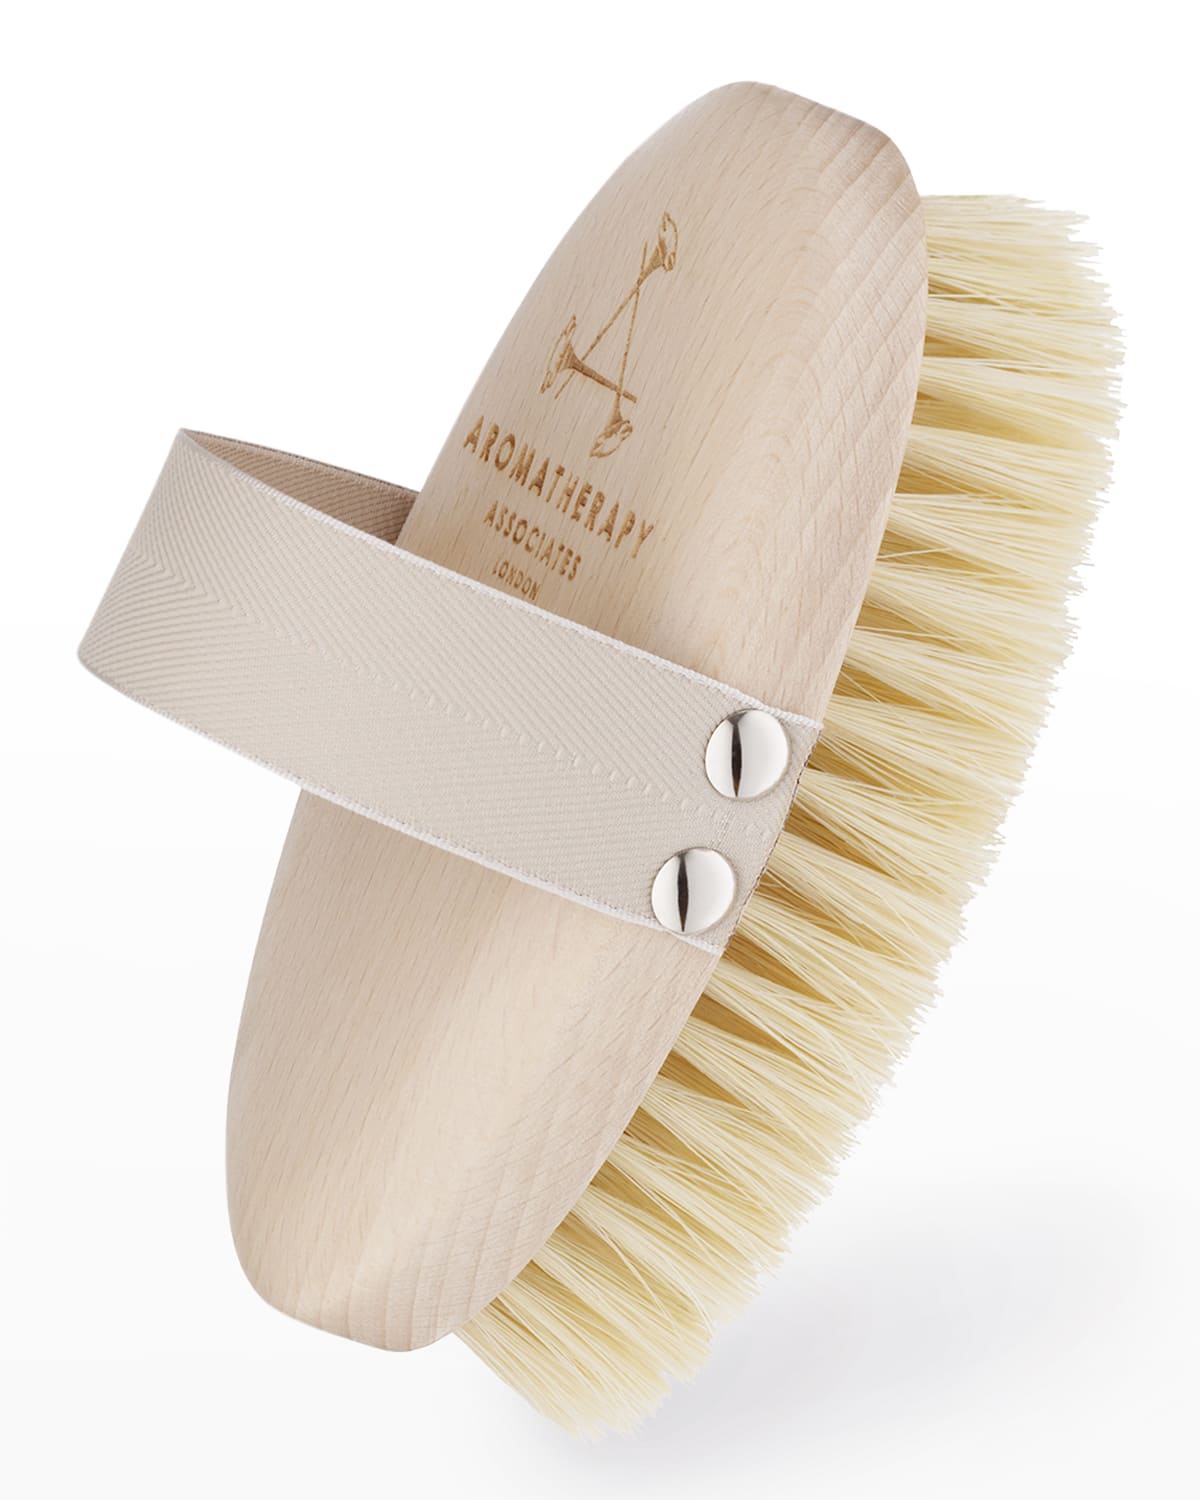 Revive Polishing Body Brush, Yours with any $75 Aromatherapy Associates Purchase